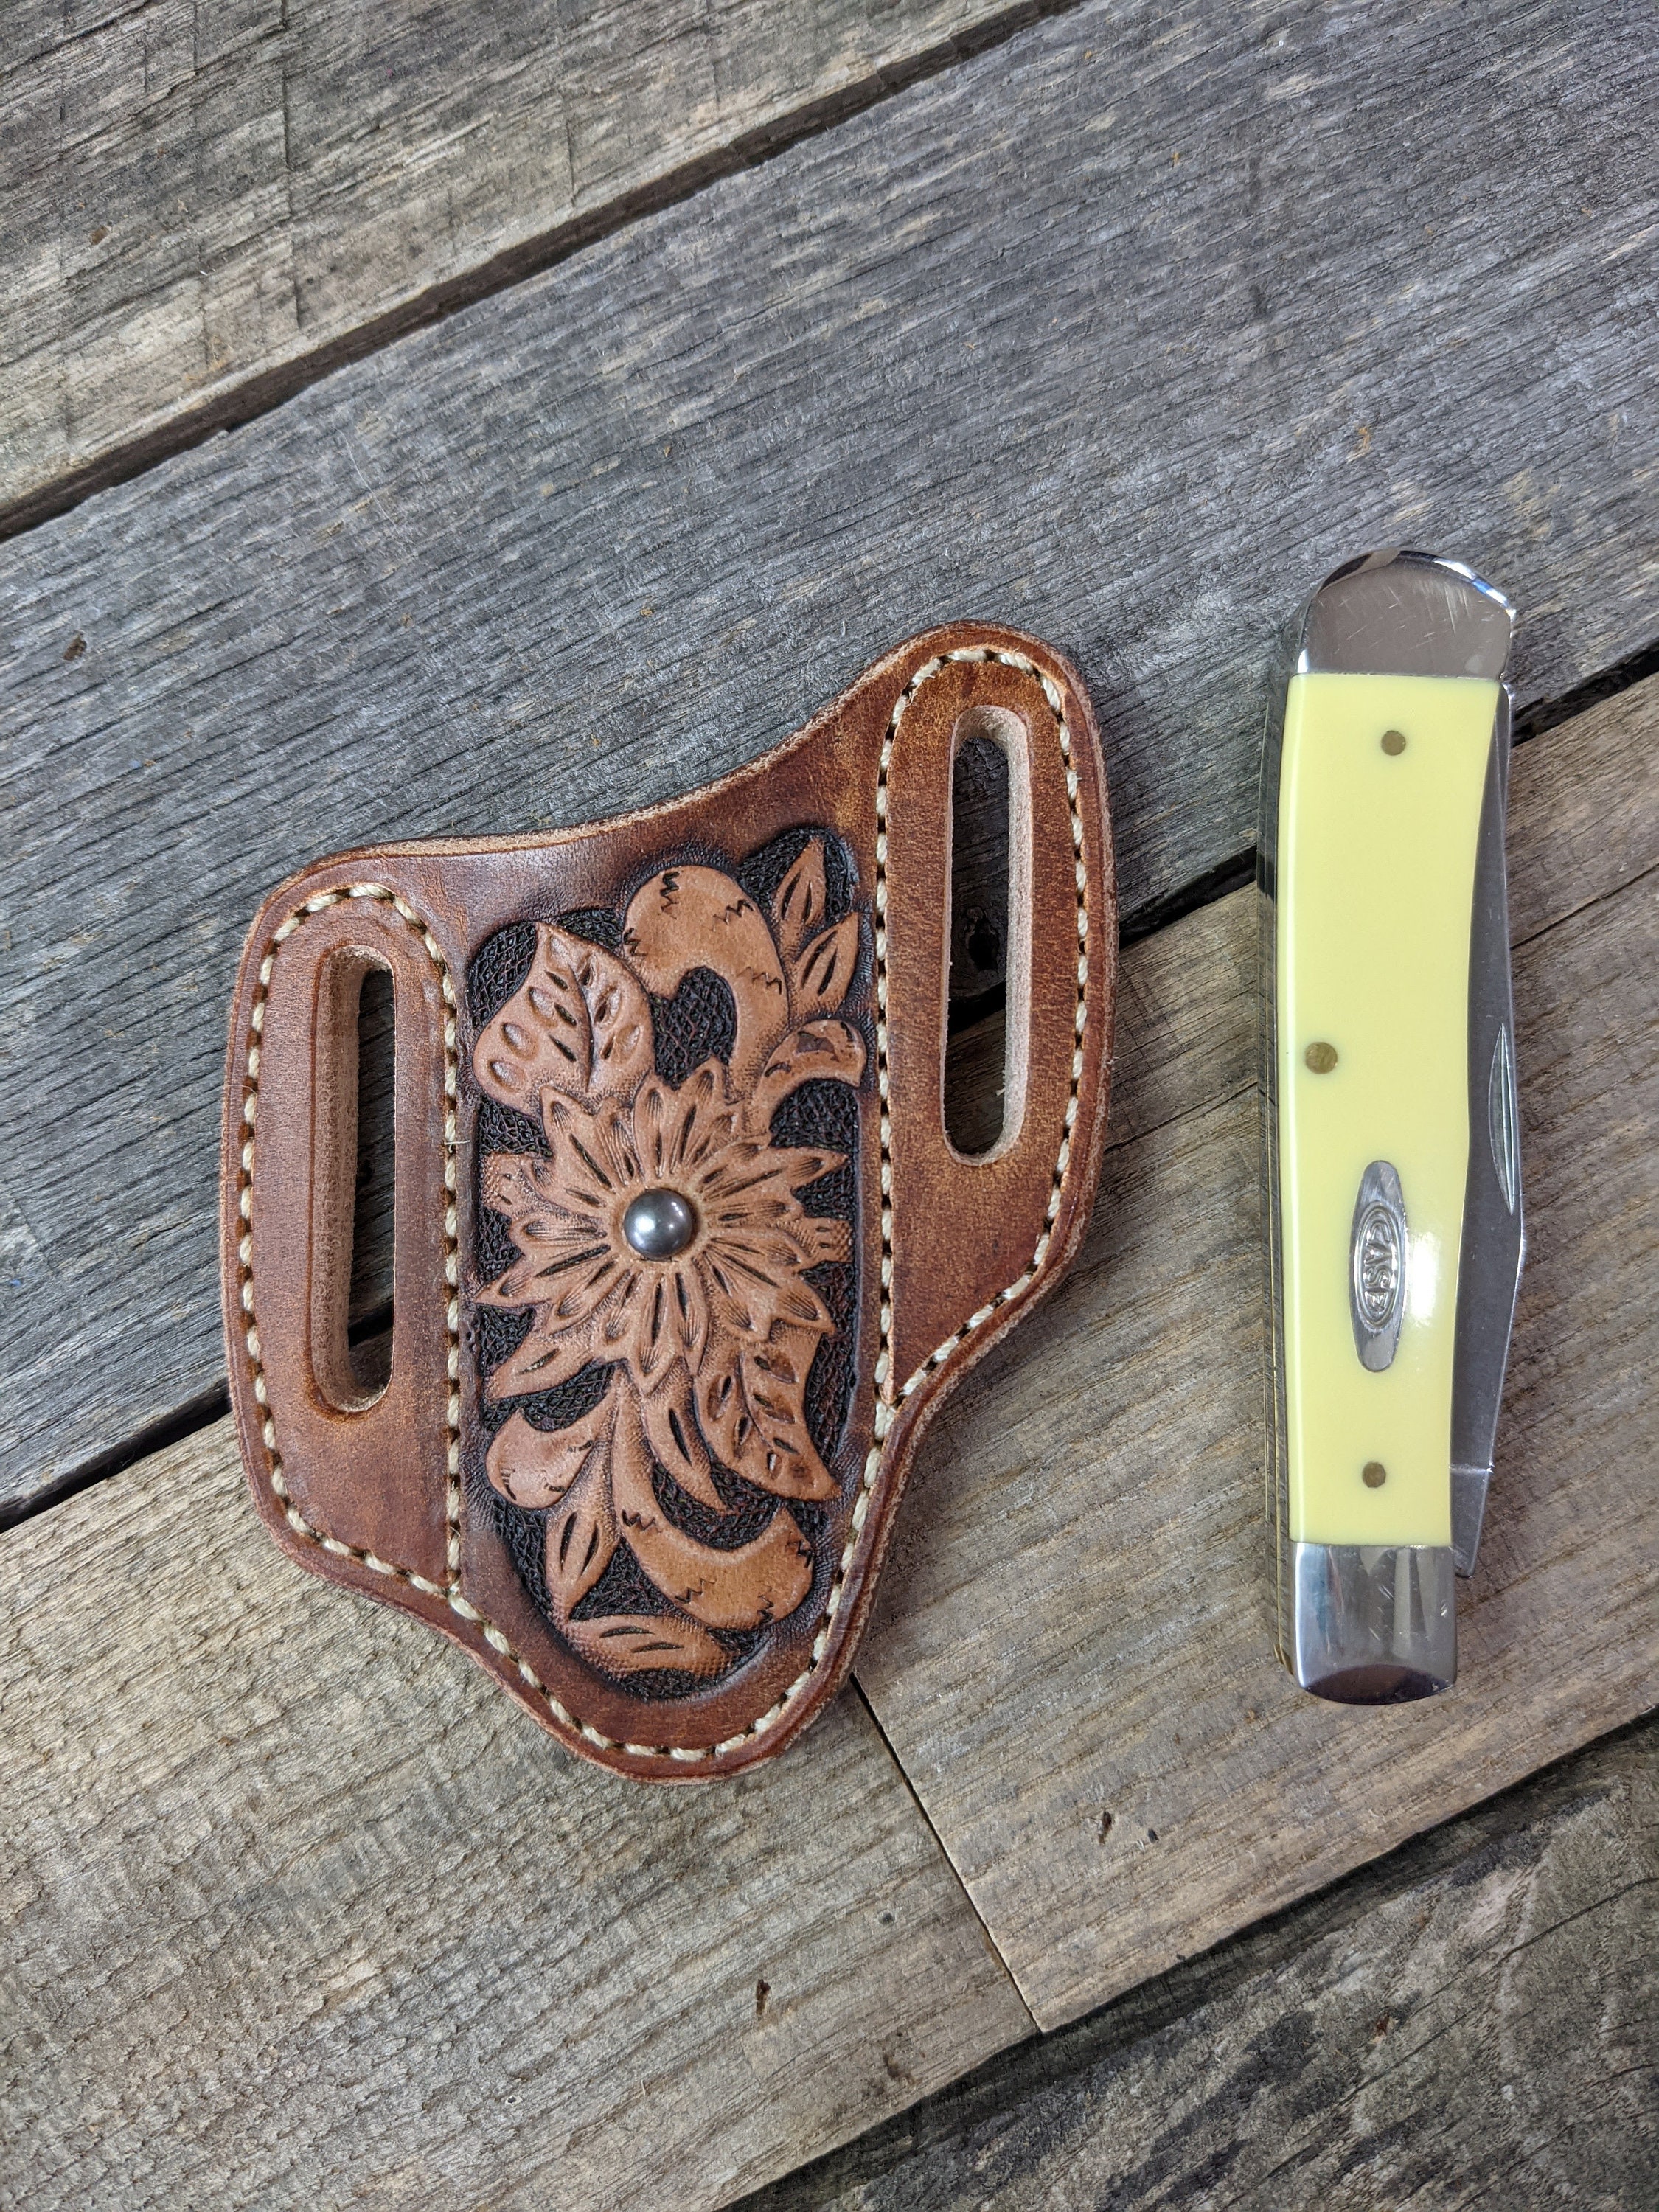 Western Belt and Gold Buckle with Pocket Knife